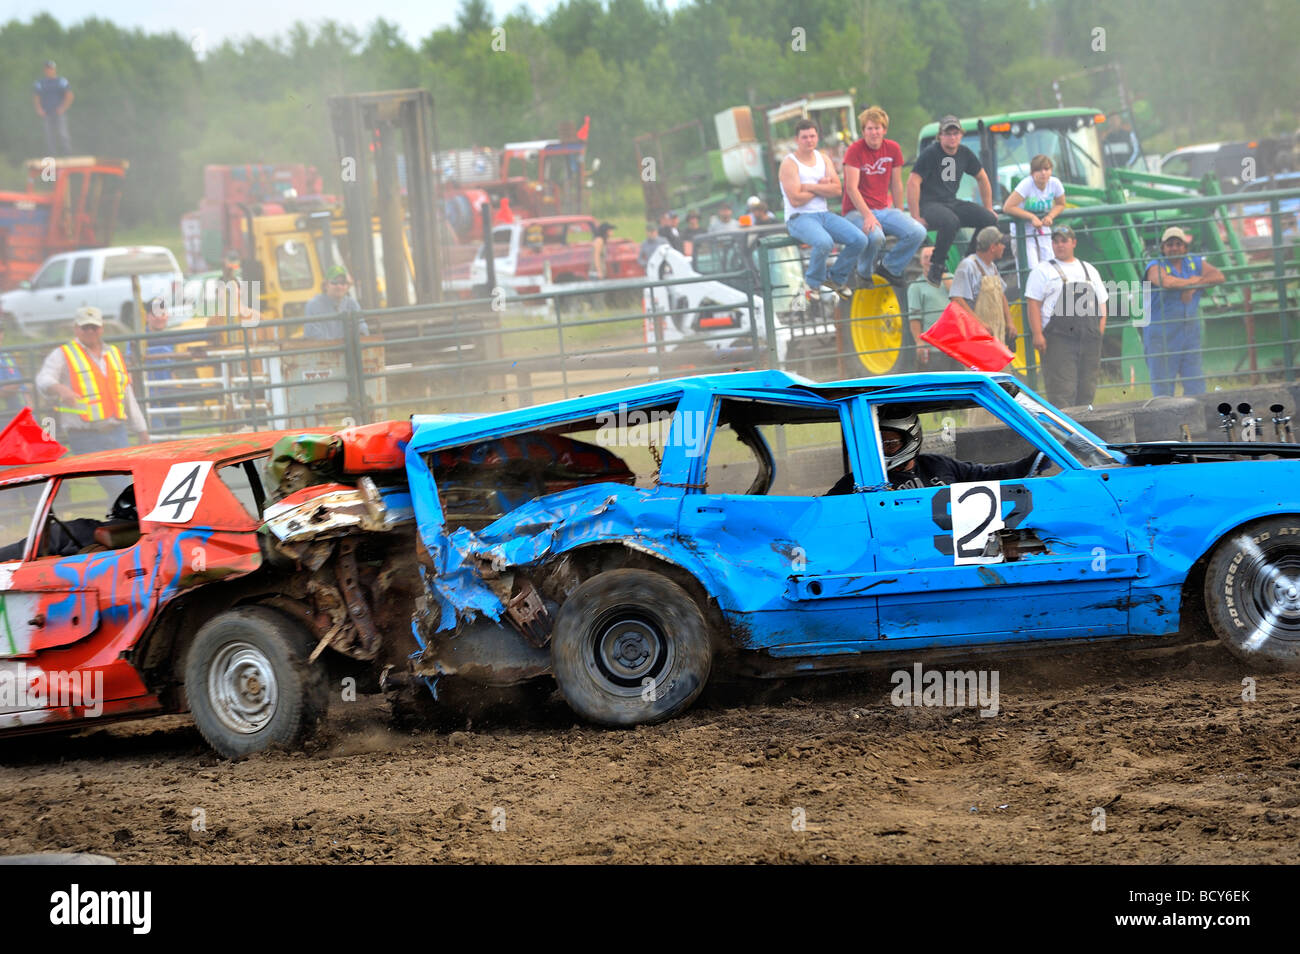 Spectators watch as two automobiles battle at a demolition derby Stock Photo